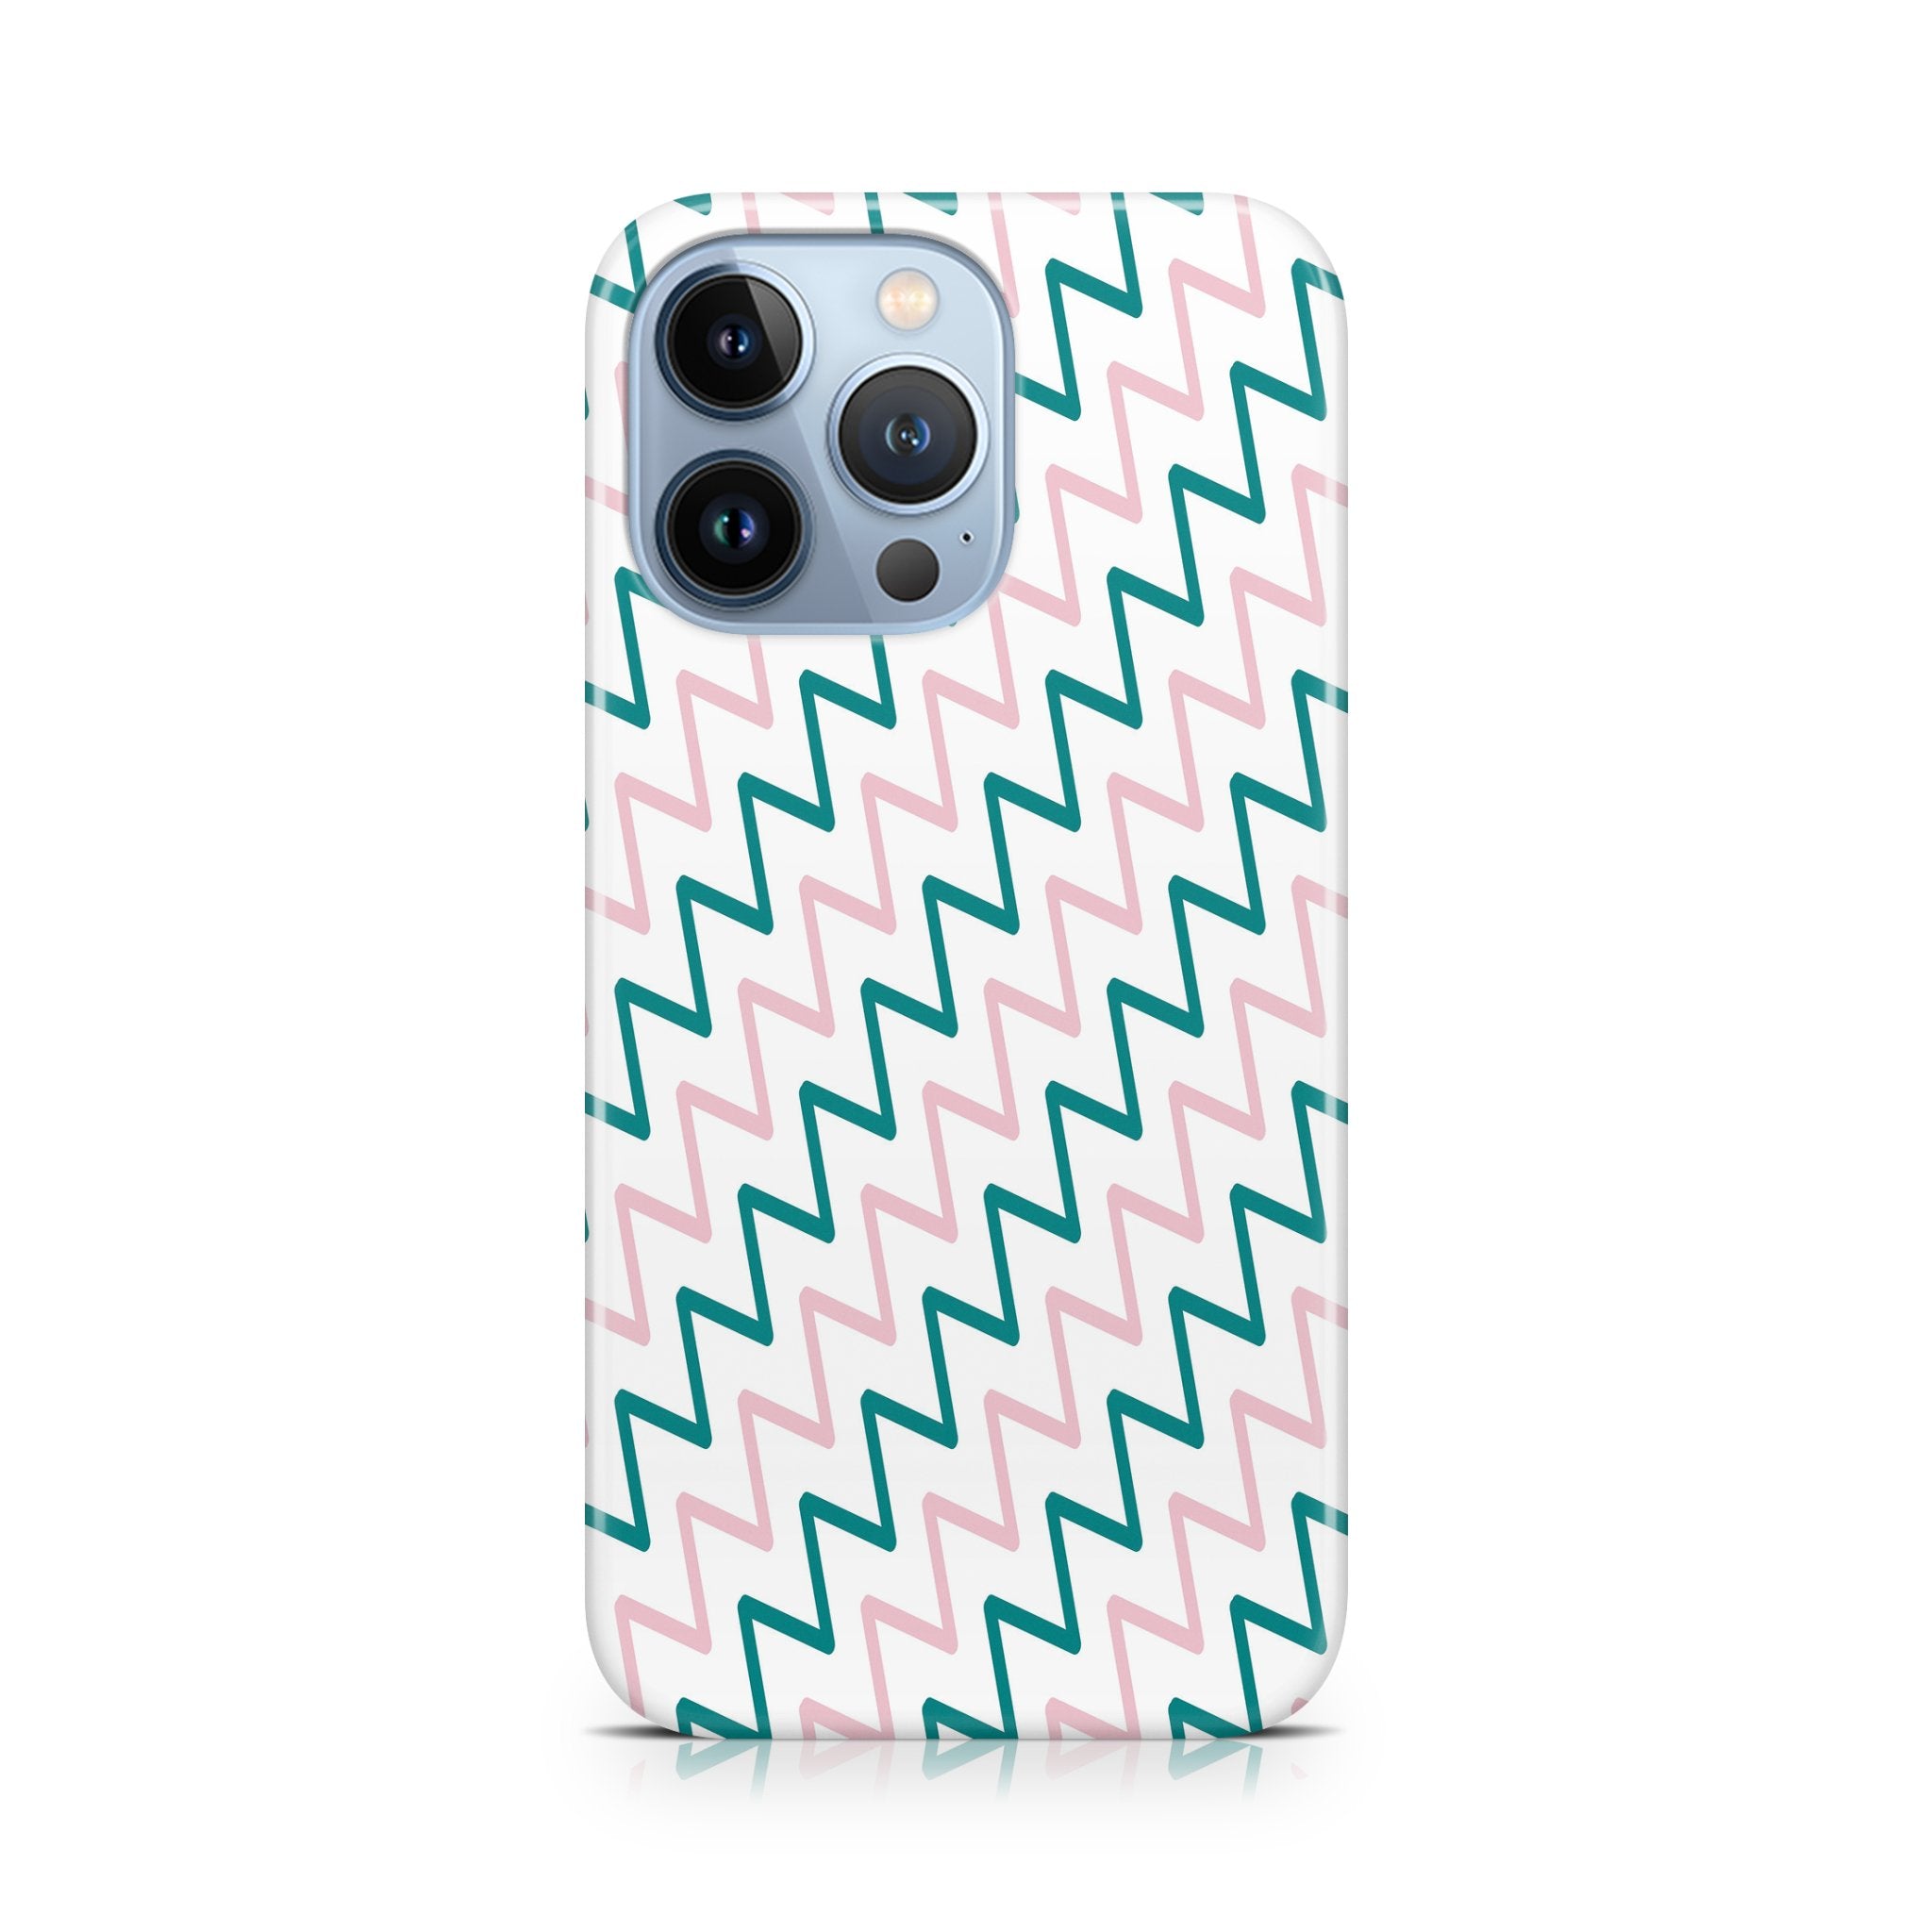 Vibrant Harmonies - iPhone phone case designs by CaseSwagger